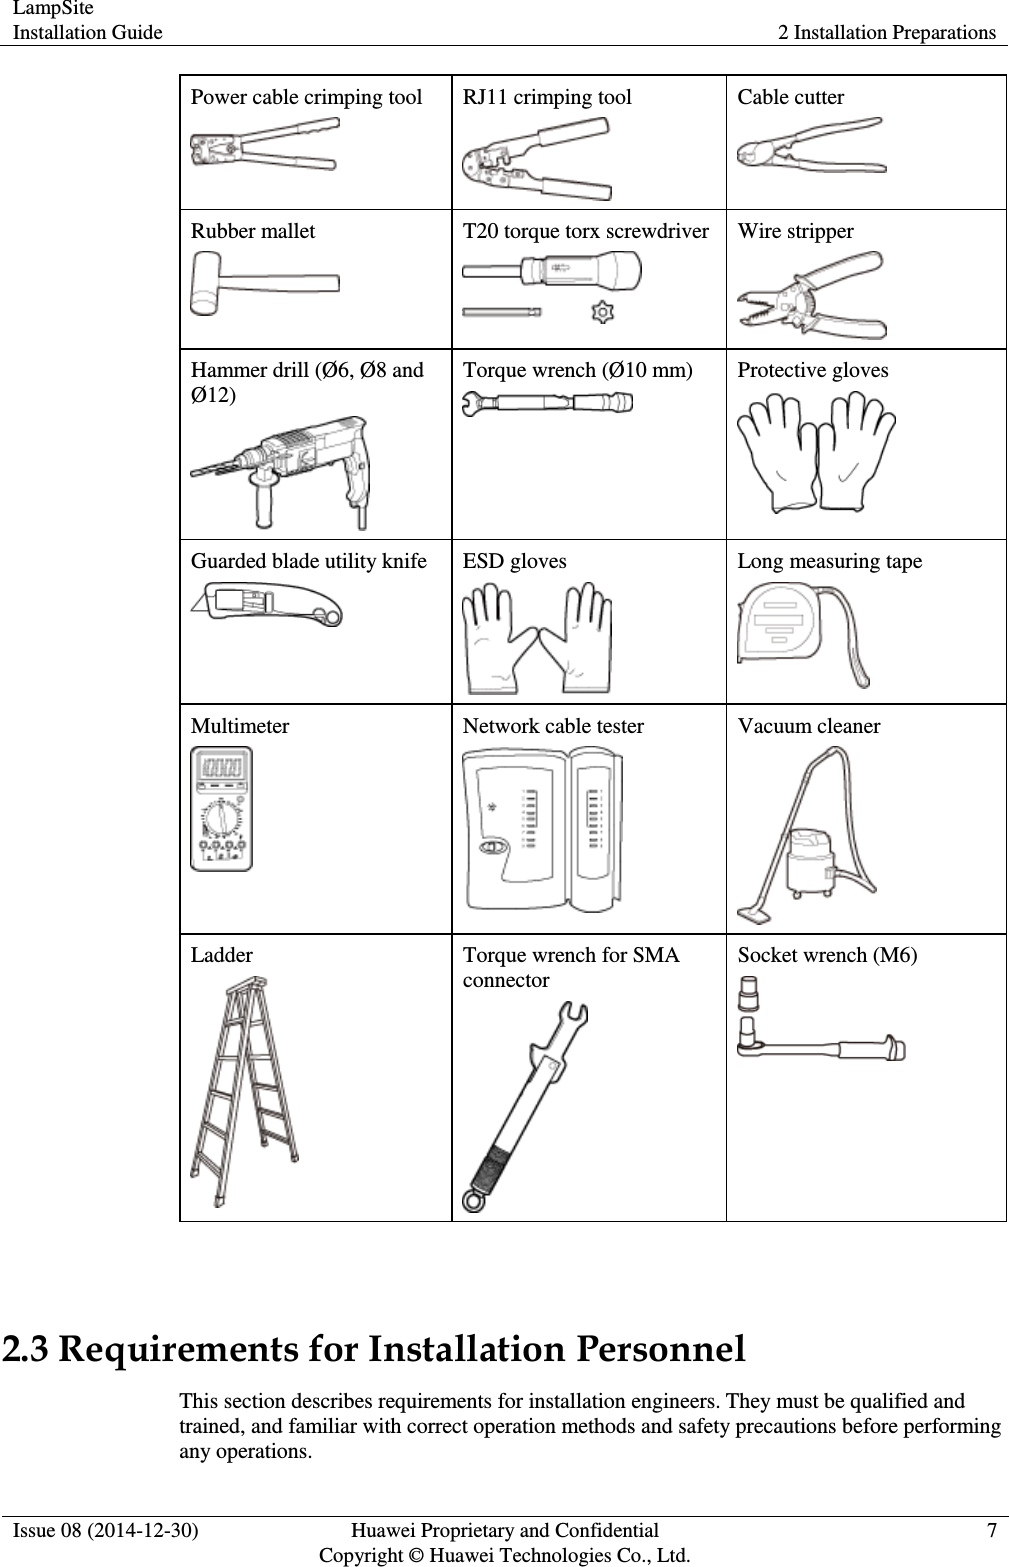 LampSite Installation Guide 2 Installation Preparations  Issue 08 (2014-12-30) Huawei Proprietary and Confidential                                     Copyright © Huawei Technologies Co., Ltd. 7  Power cable crimping tool  RJ11 crimping tool  Cable cutter  Rubber mallet  T20 torque torx screwdriver  Wire stripper  Hammer drill (Ø6, Ø8 and Ø12)  Torque wrench (Ø10 mm)  Protective gloves  Guarded blade utility knife  ESD gloves  Long measuring tape  Multimeter  Network cable tester  Vacuum cleaner  Ladder  Torque wrench for SMA connector  Socket wrench (M6)   2.3 Requirements for Installation Personnel This section describes requirements for installation engineers. They must be qualified and trained, and familiar with correct operation methods and safety precautions before performing any operations.   